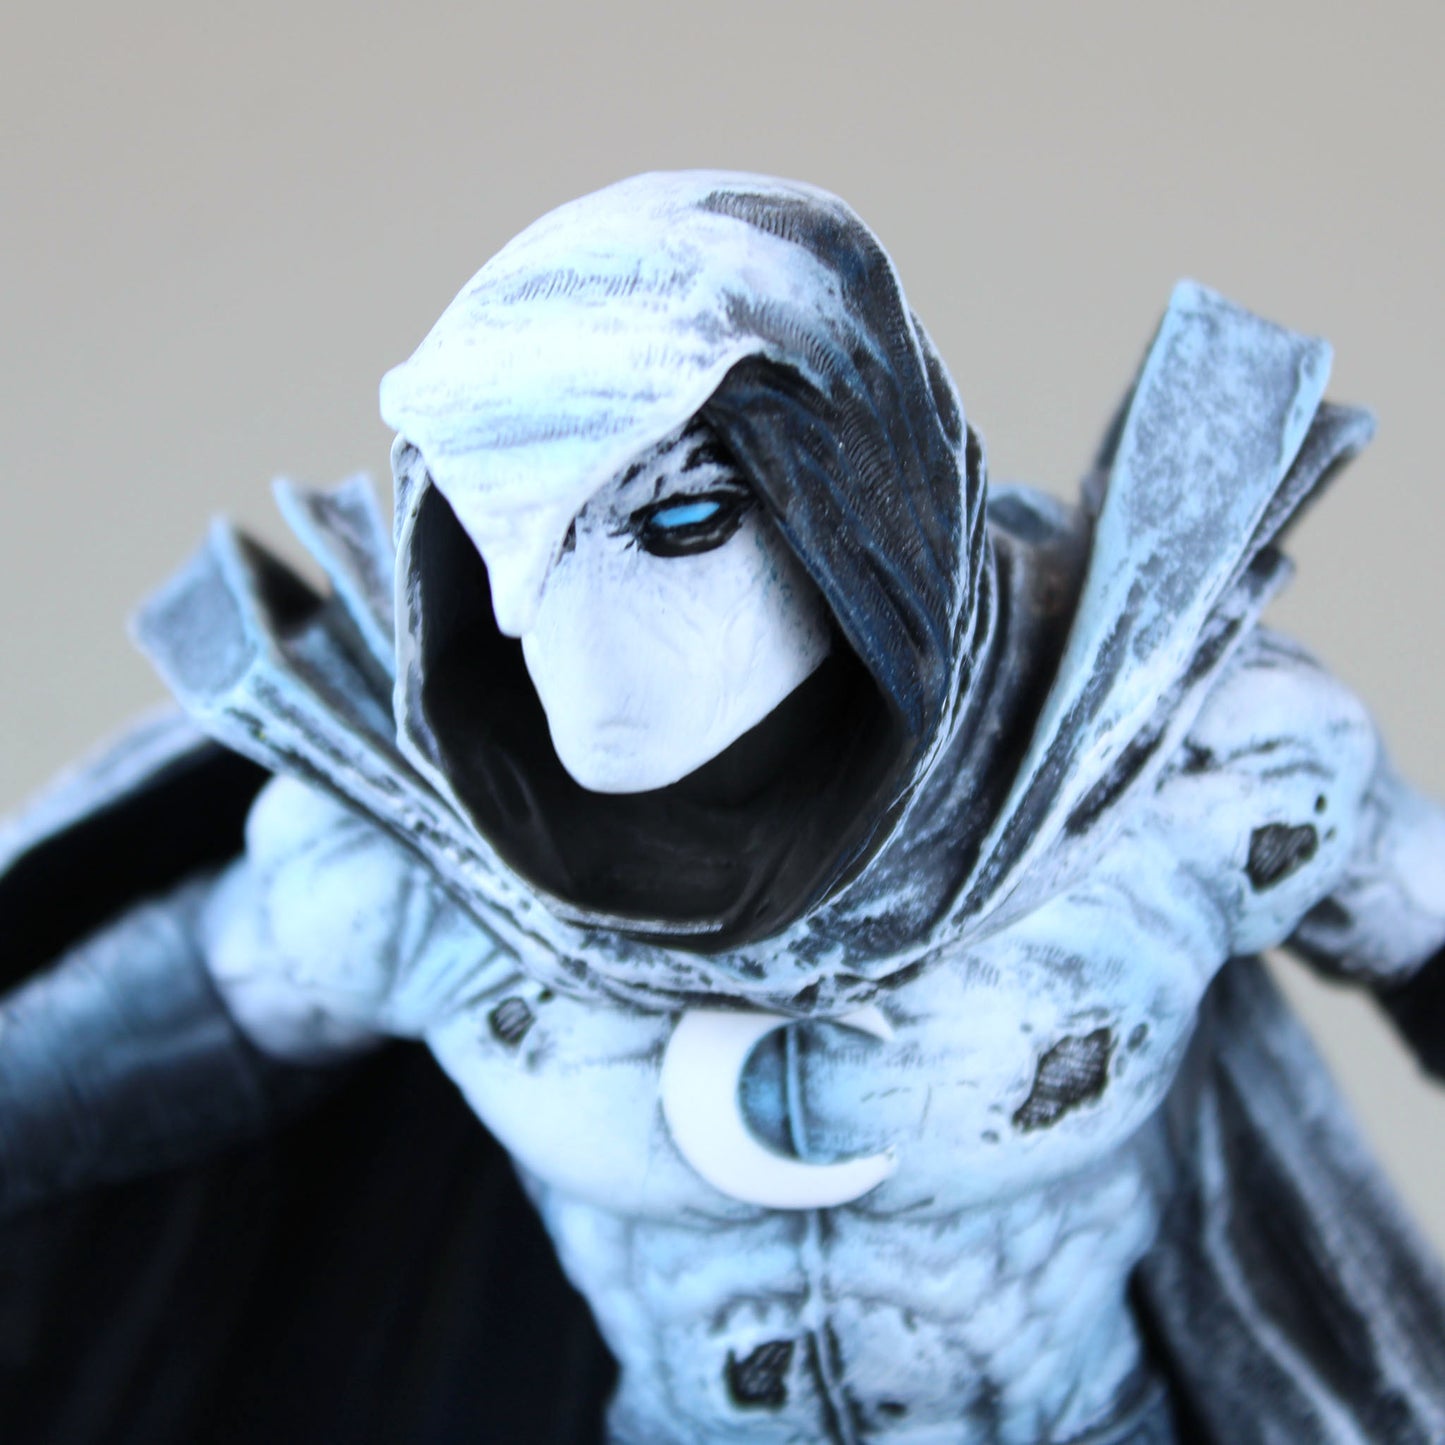 Moon Knight Marvel Premier Collection Resin Statue